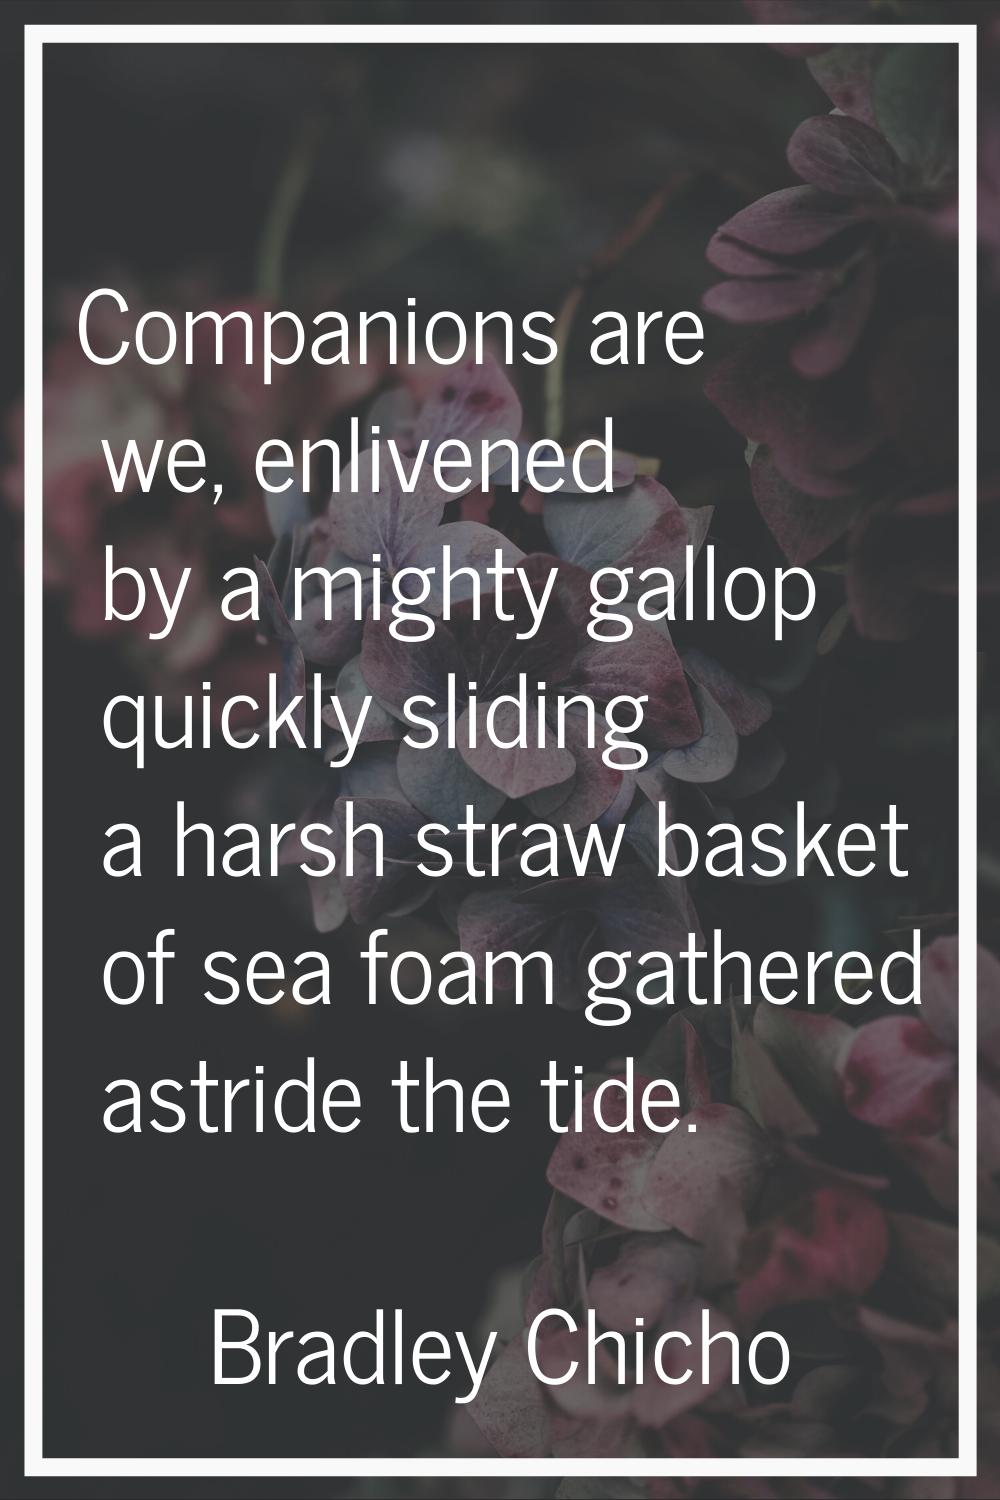 Companions are we, enlivened by a mighty gallop quickly sliding a harsh straw basket of sea foam ga